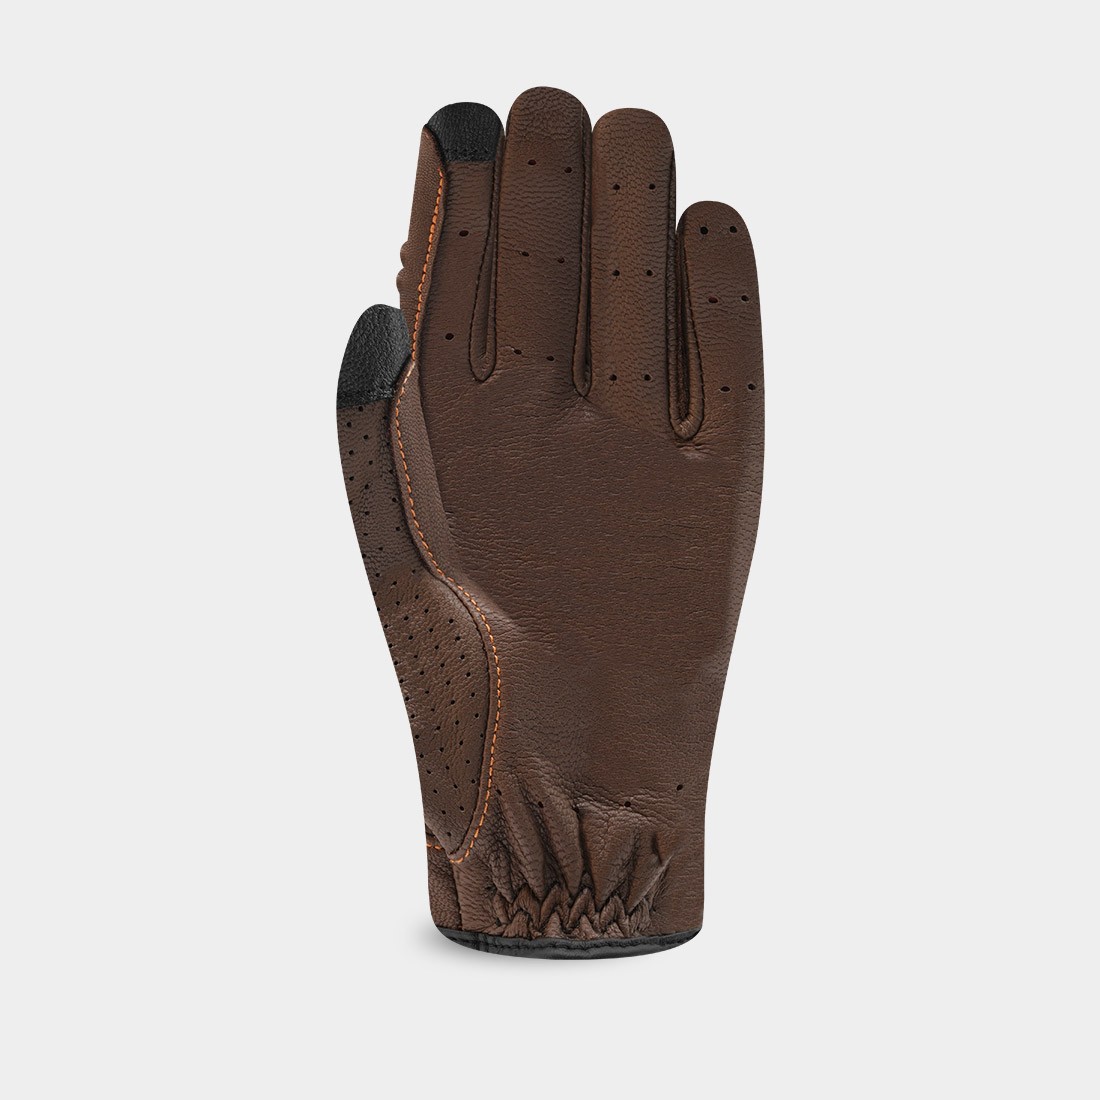 TRADITION LIMITED EDITION - RIDING GLOVE